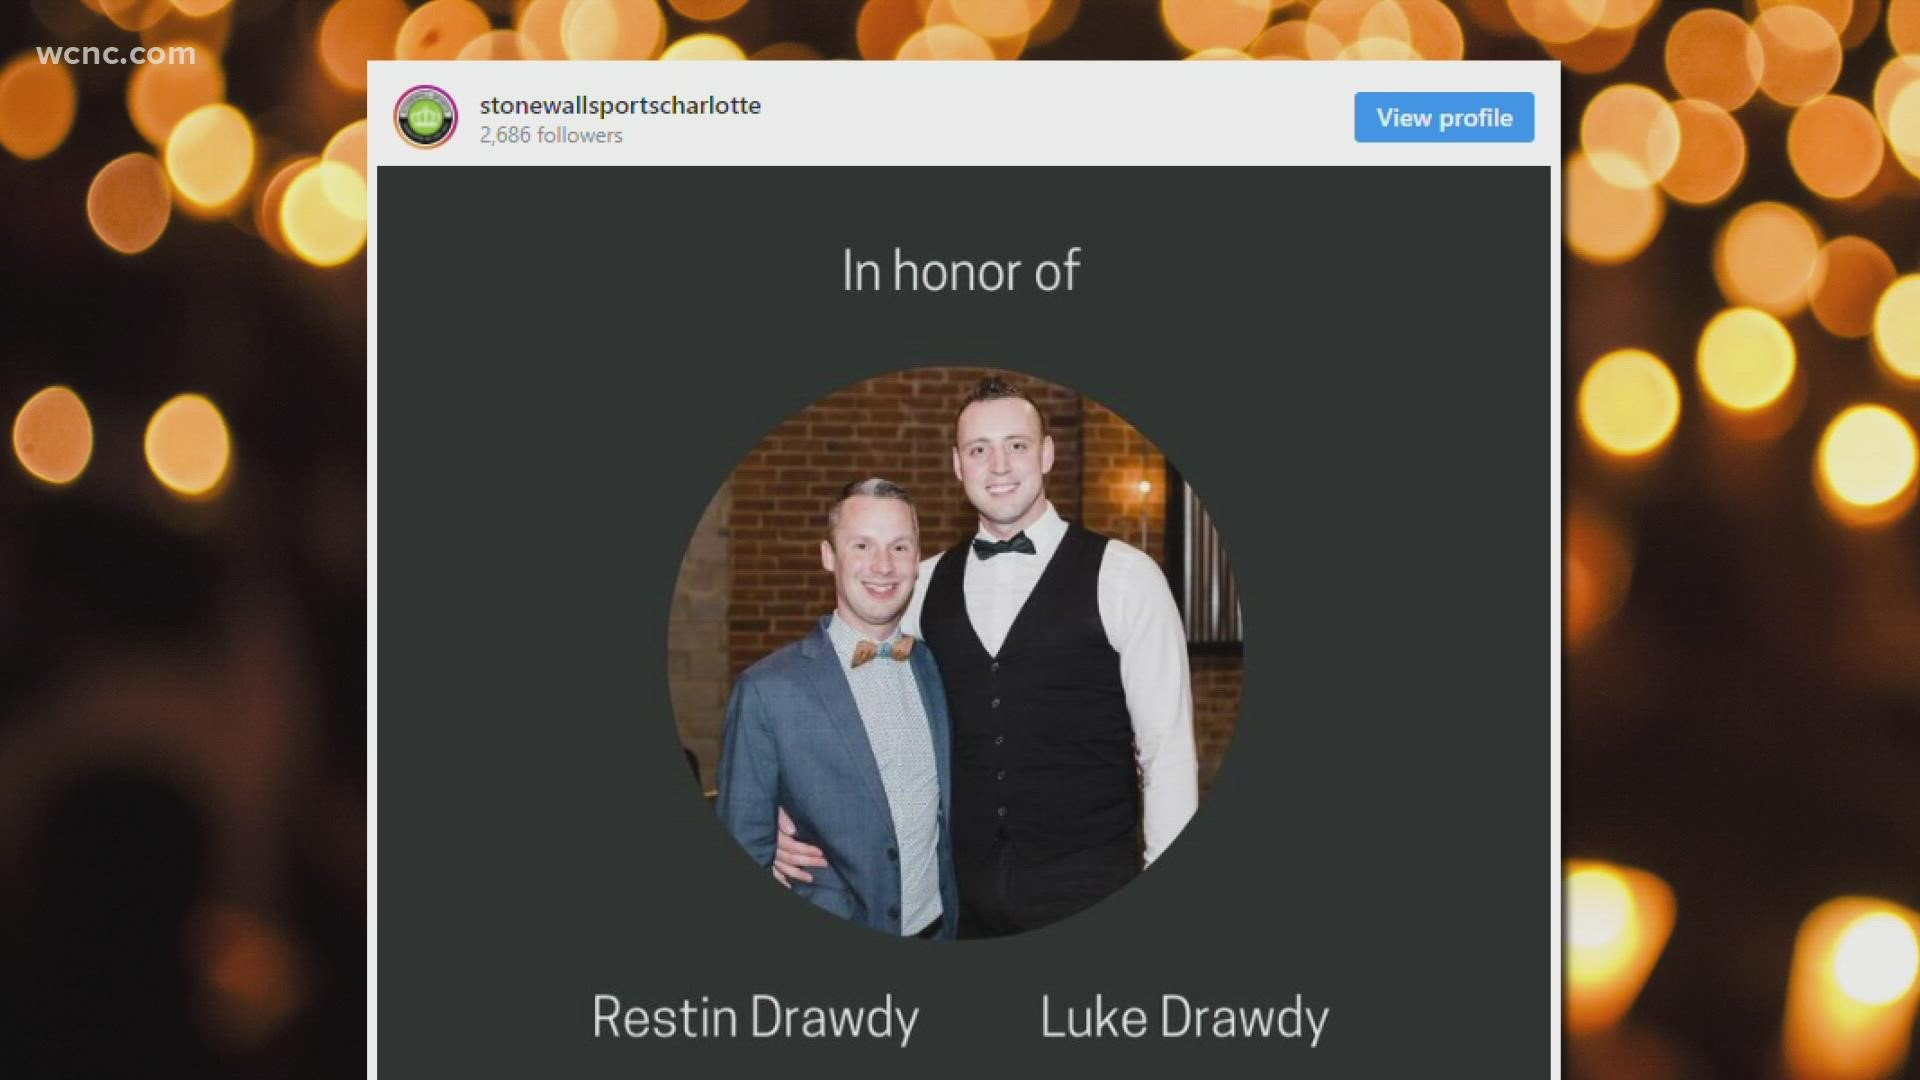 Luke and Restin Drawdy died earlier this week after a crash on North Tryon Street. The other driver involved was impaired, according to CMPD.